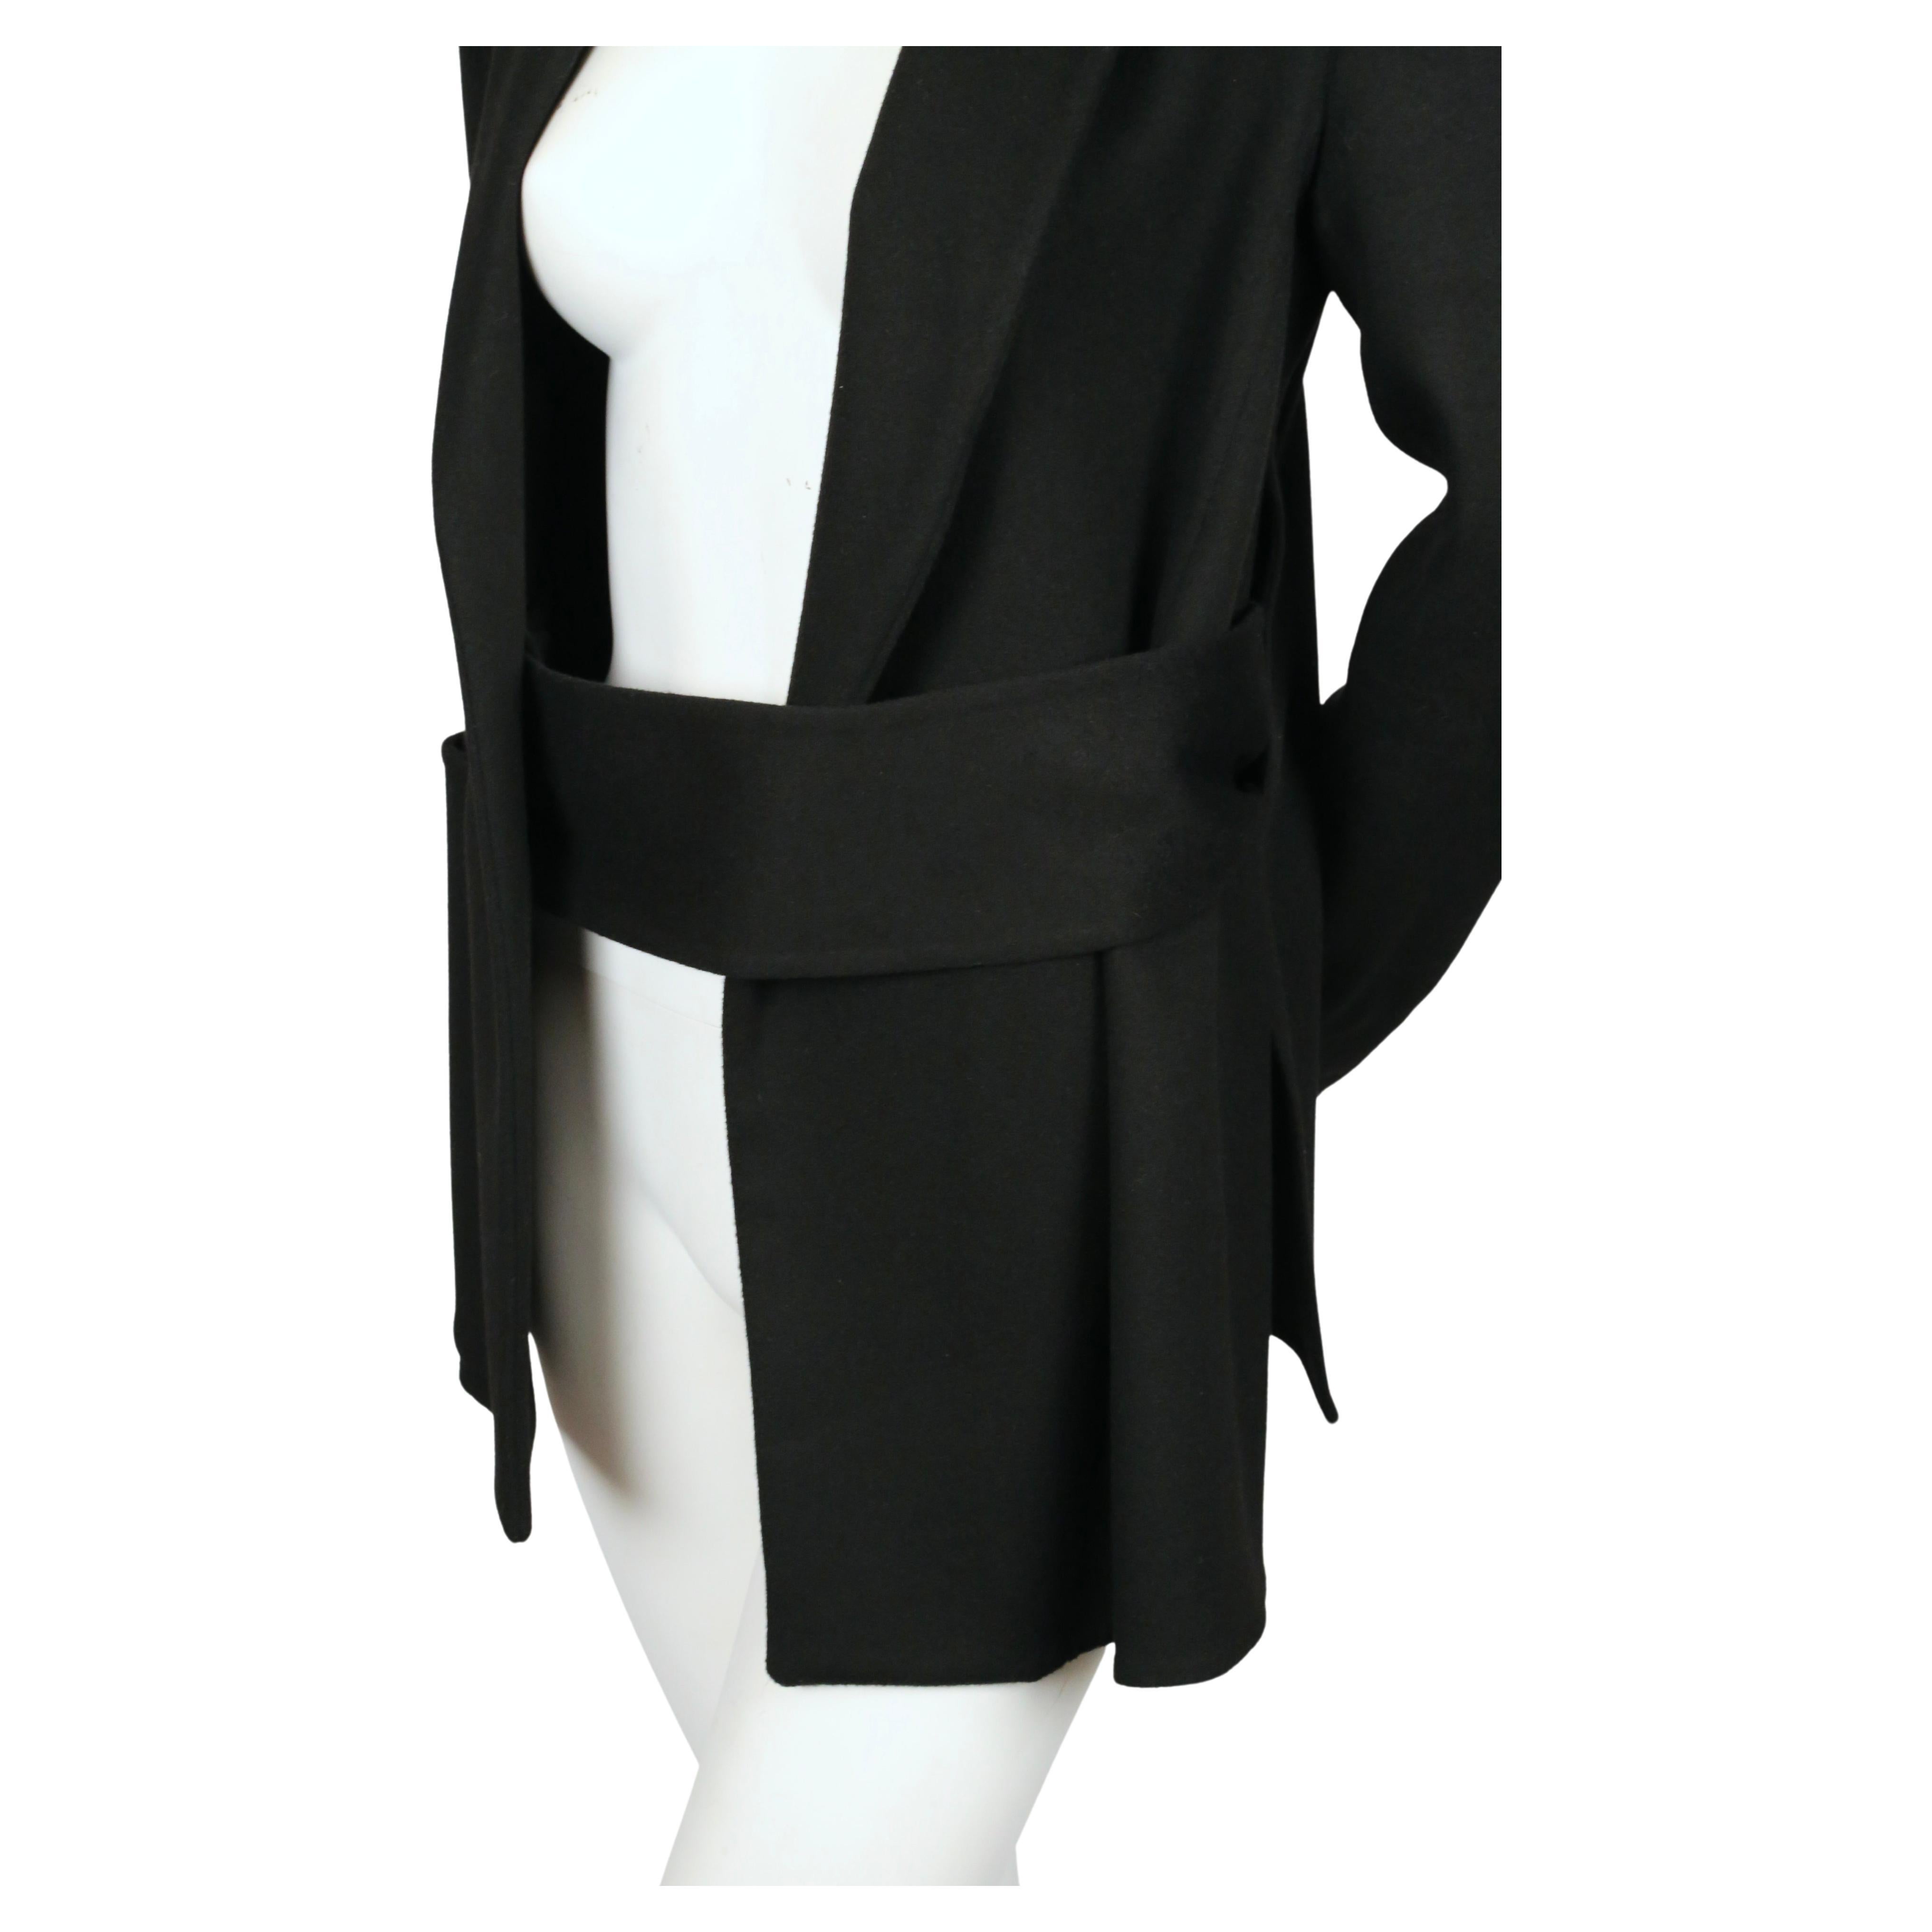 CELINE by PHOEBE PHILO black wool and cashmere jacket with asymmetrical belt For Sale 2